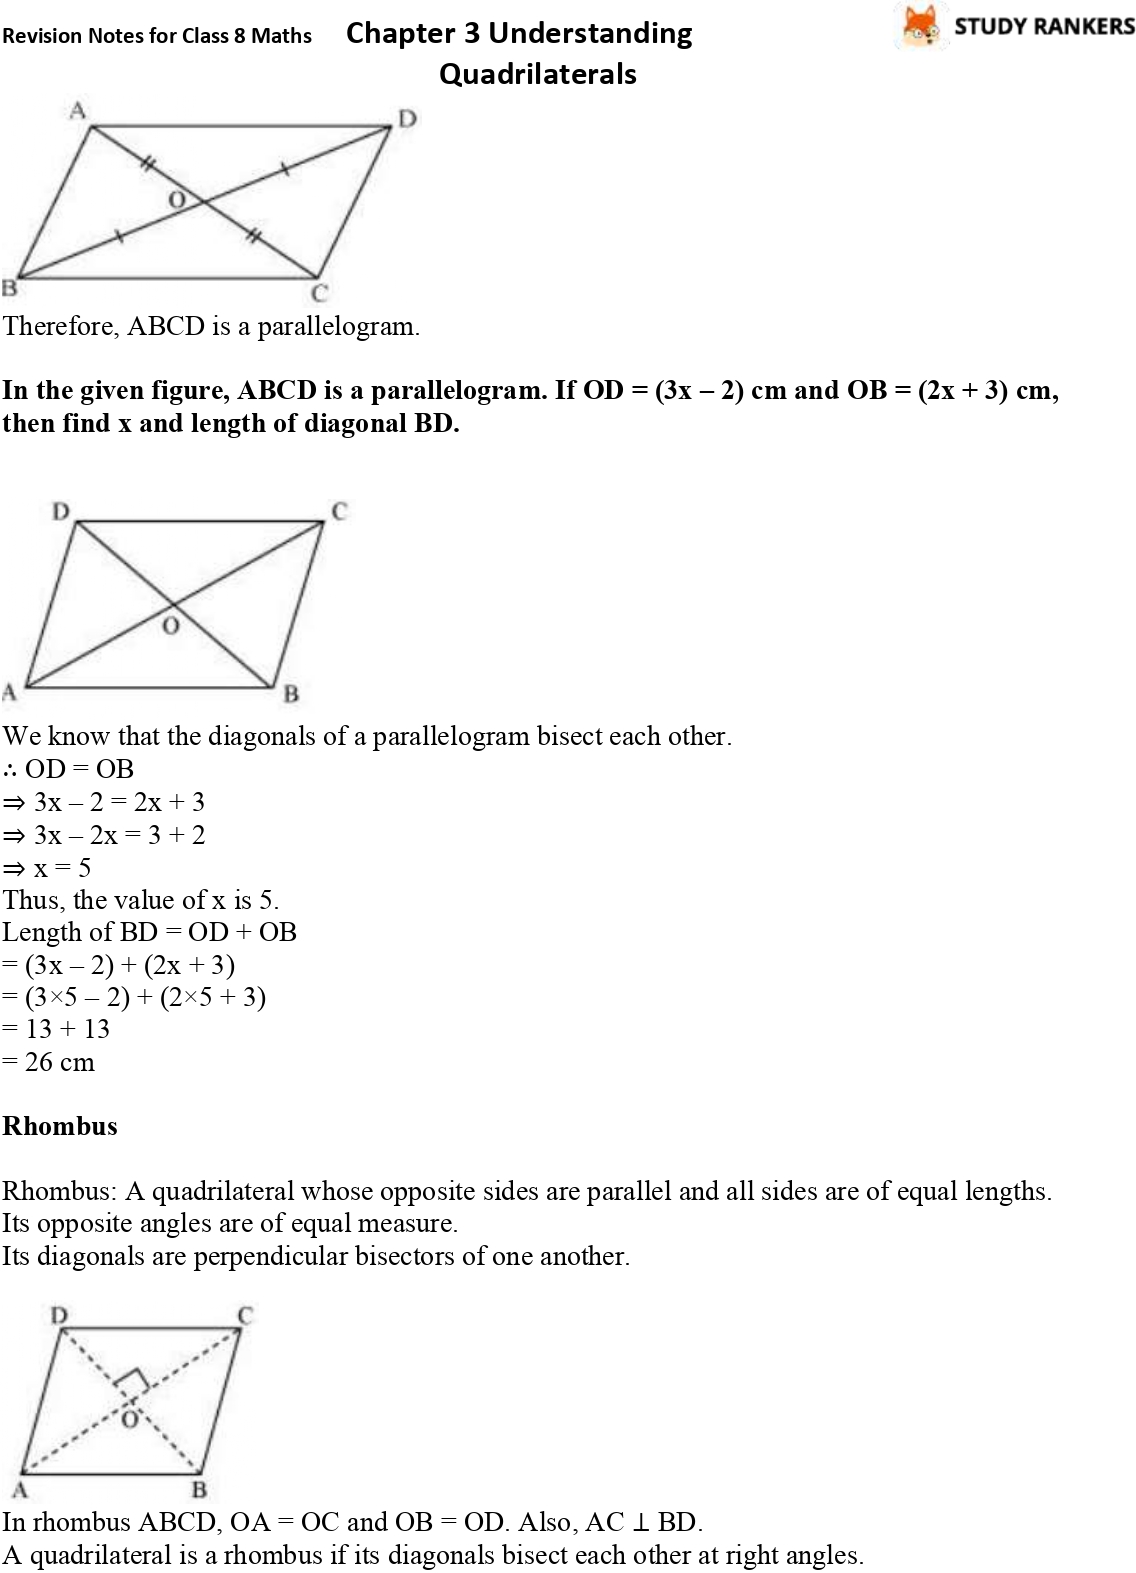 case study questions on understanding quadrilaterals for class 8